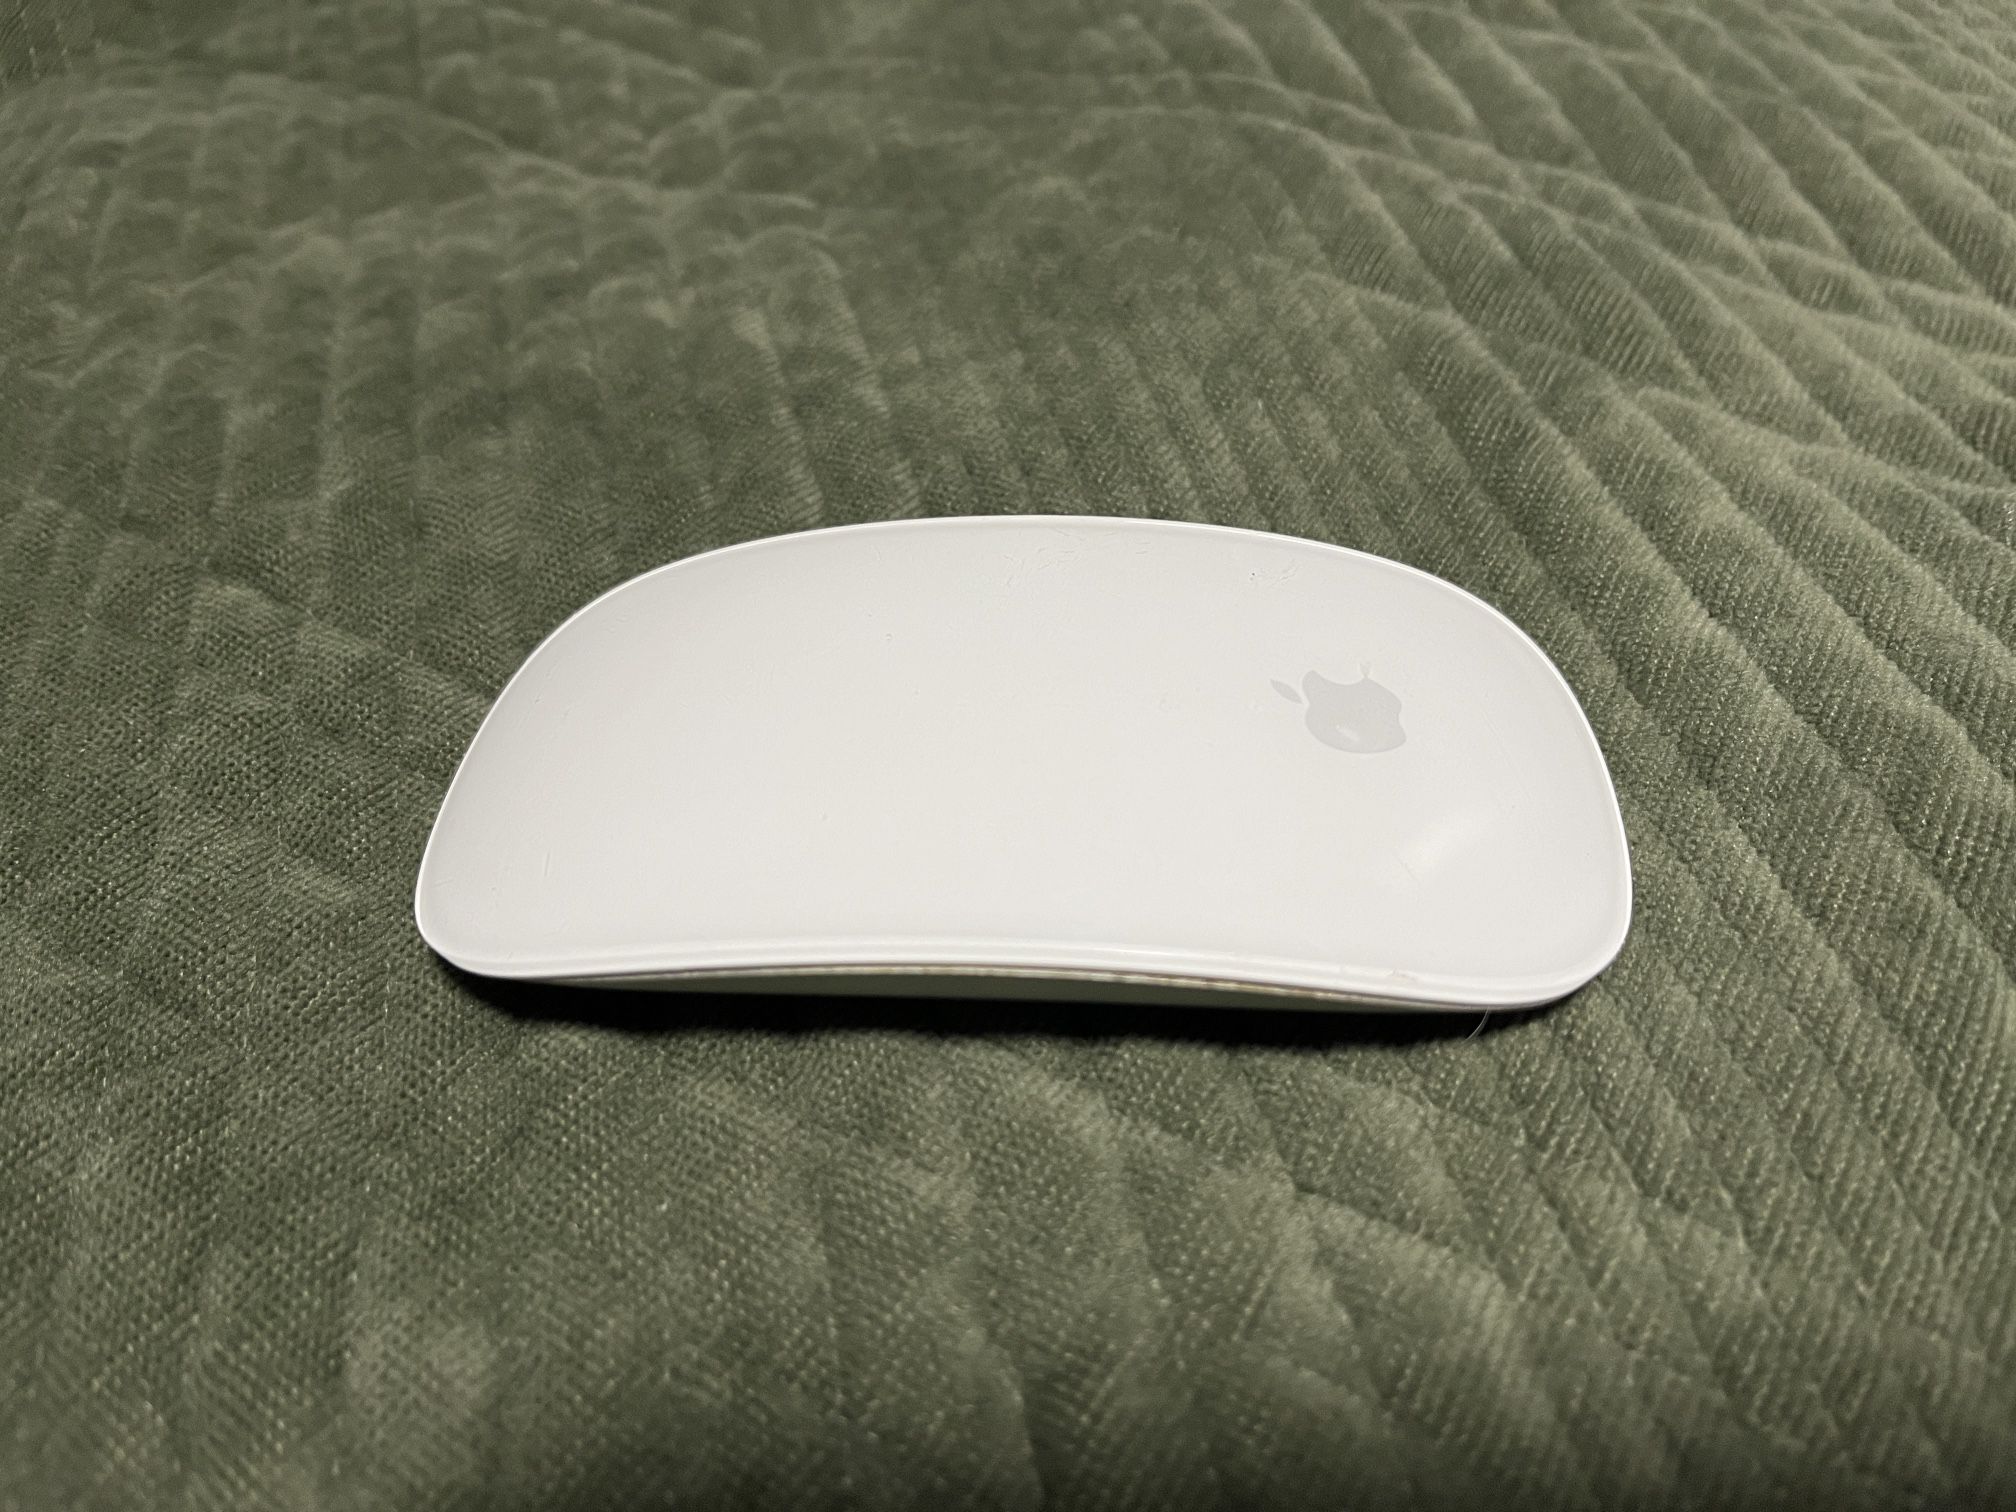 Apple Mac Rechargeable Computer Magic Mouse